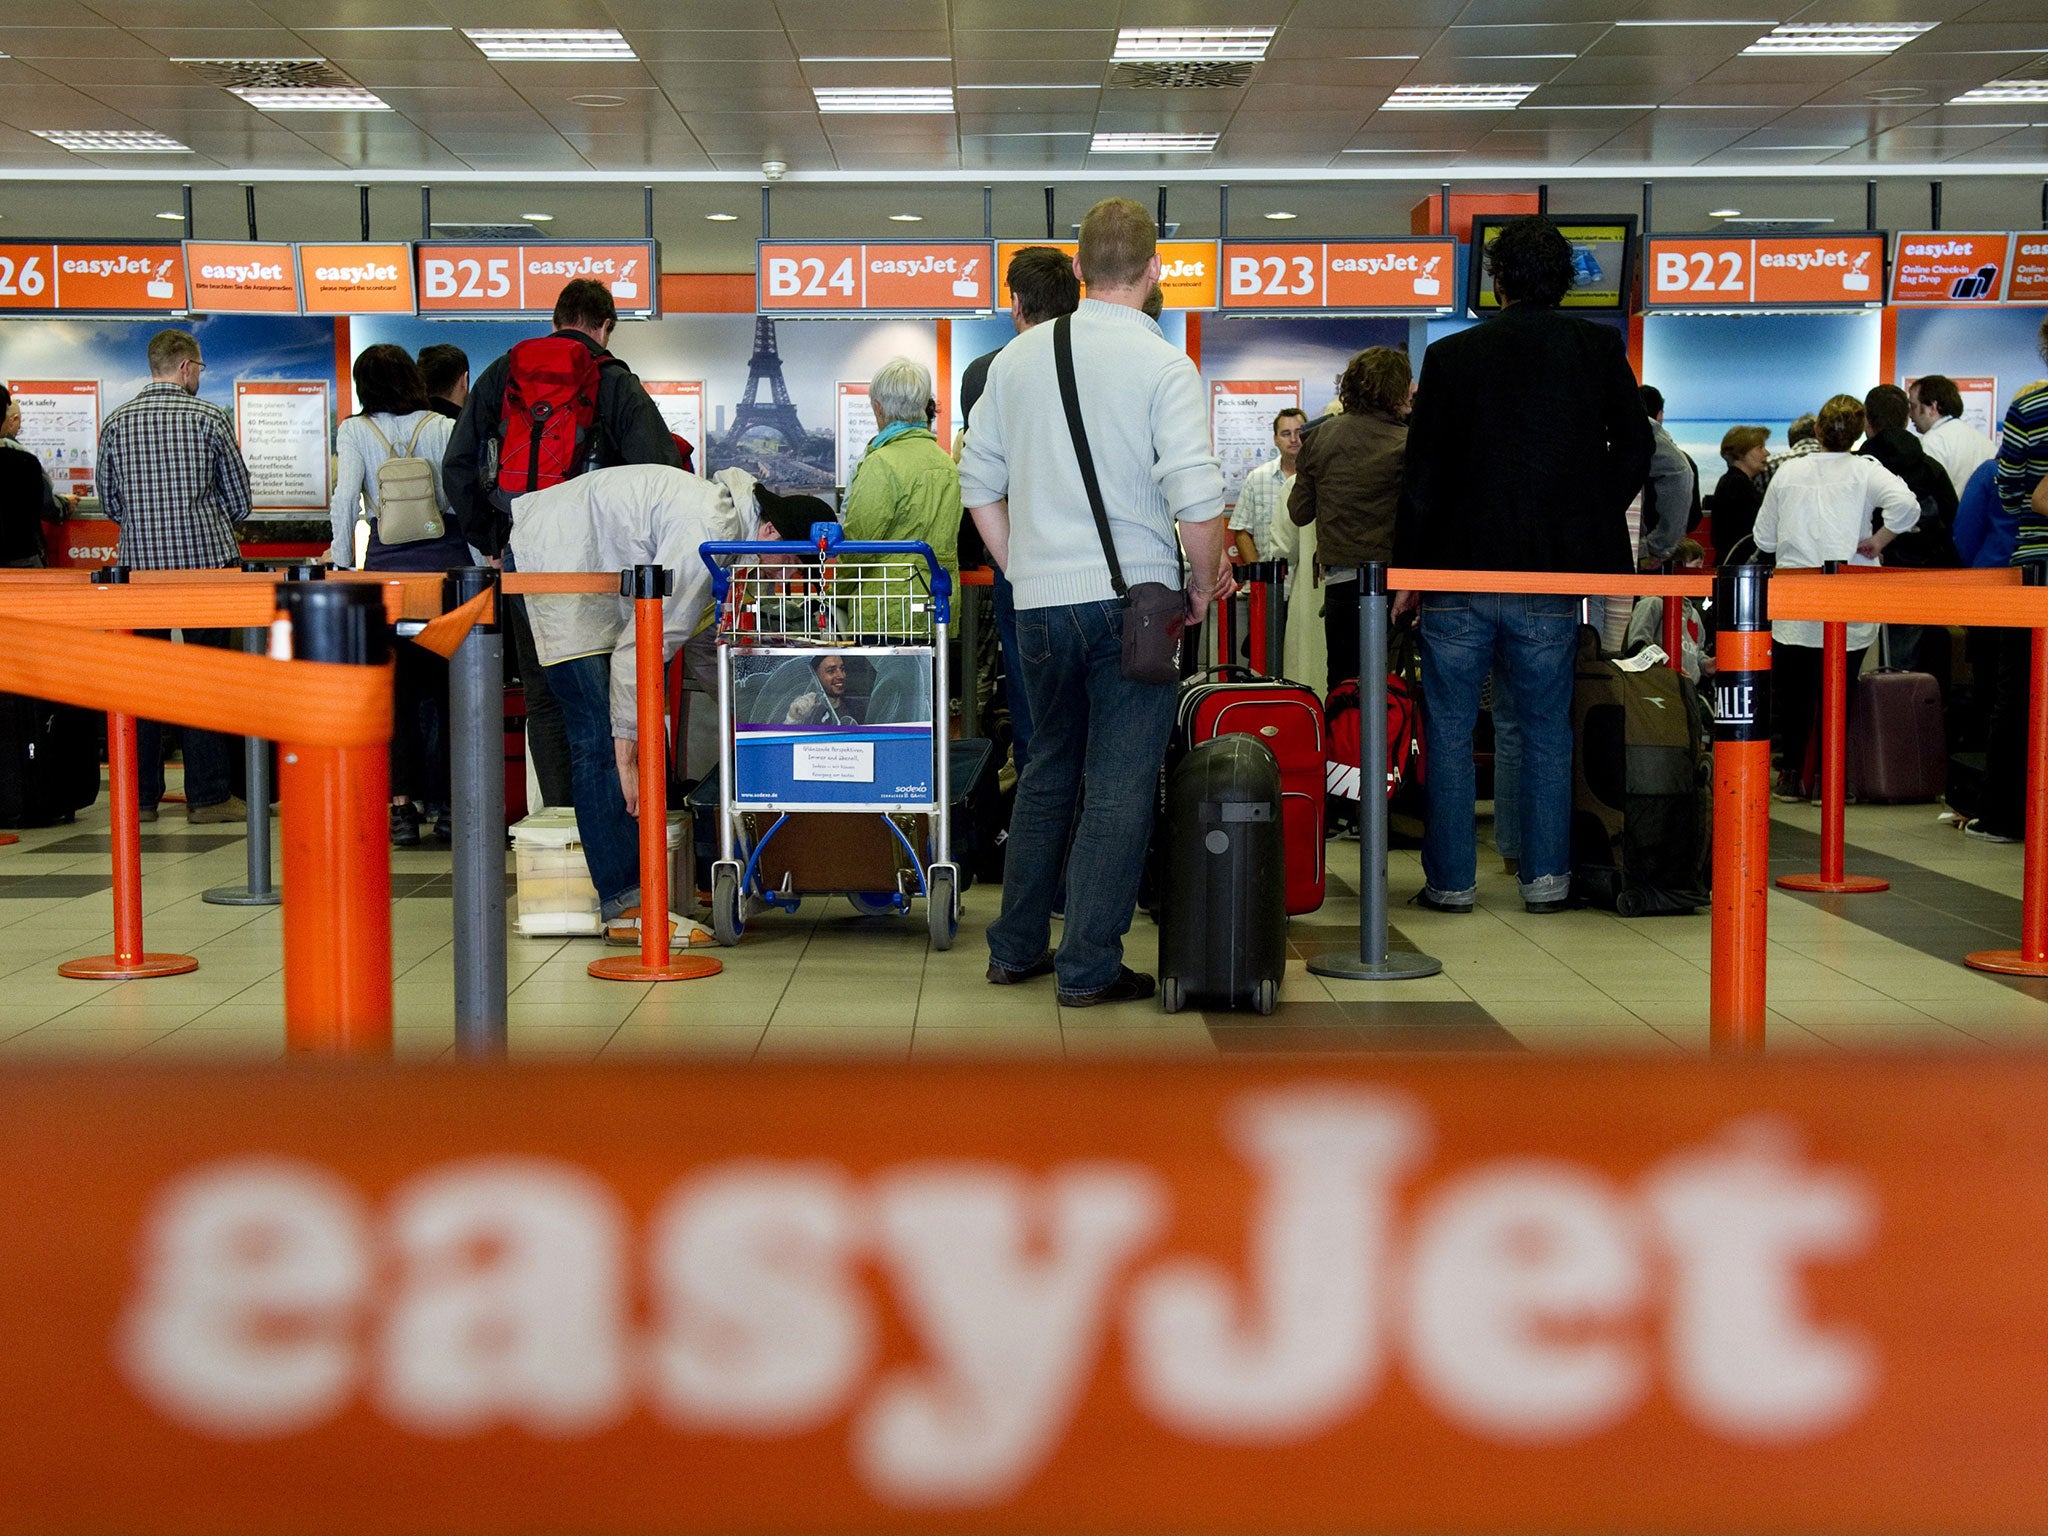 Passengers queue up at the Easyjet counter at Berlin's Schoenefeld airport.